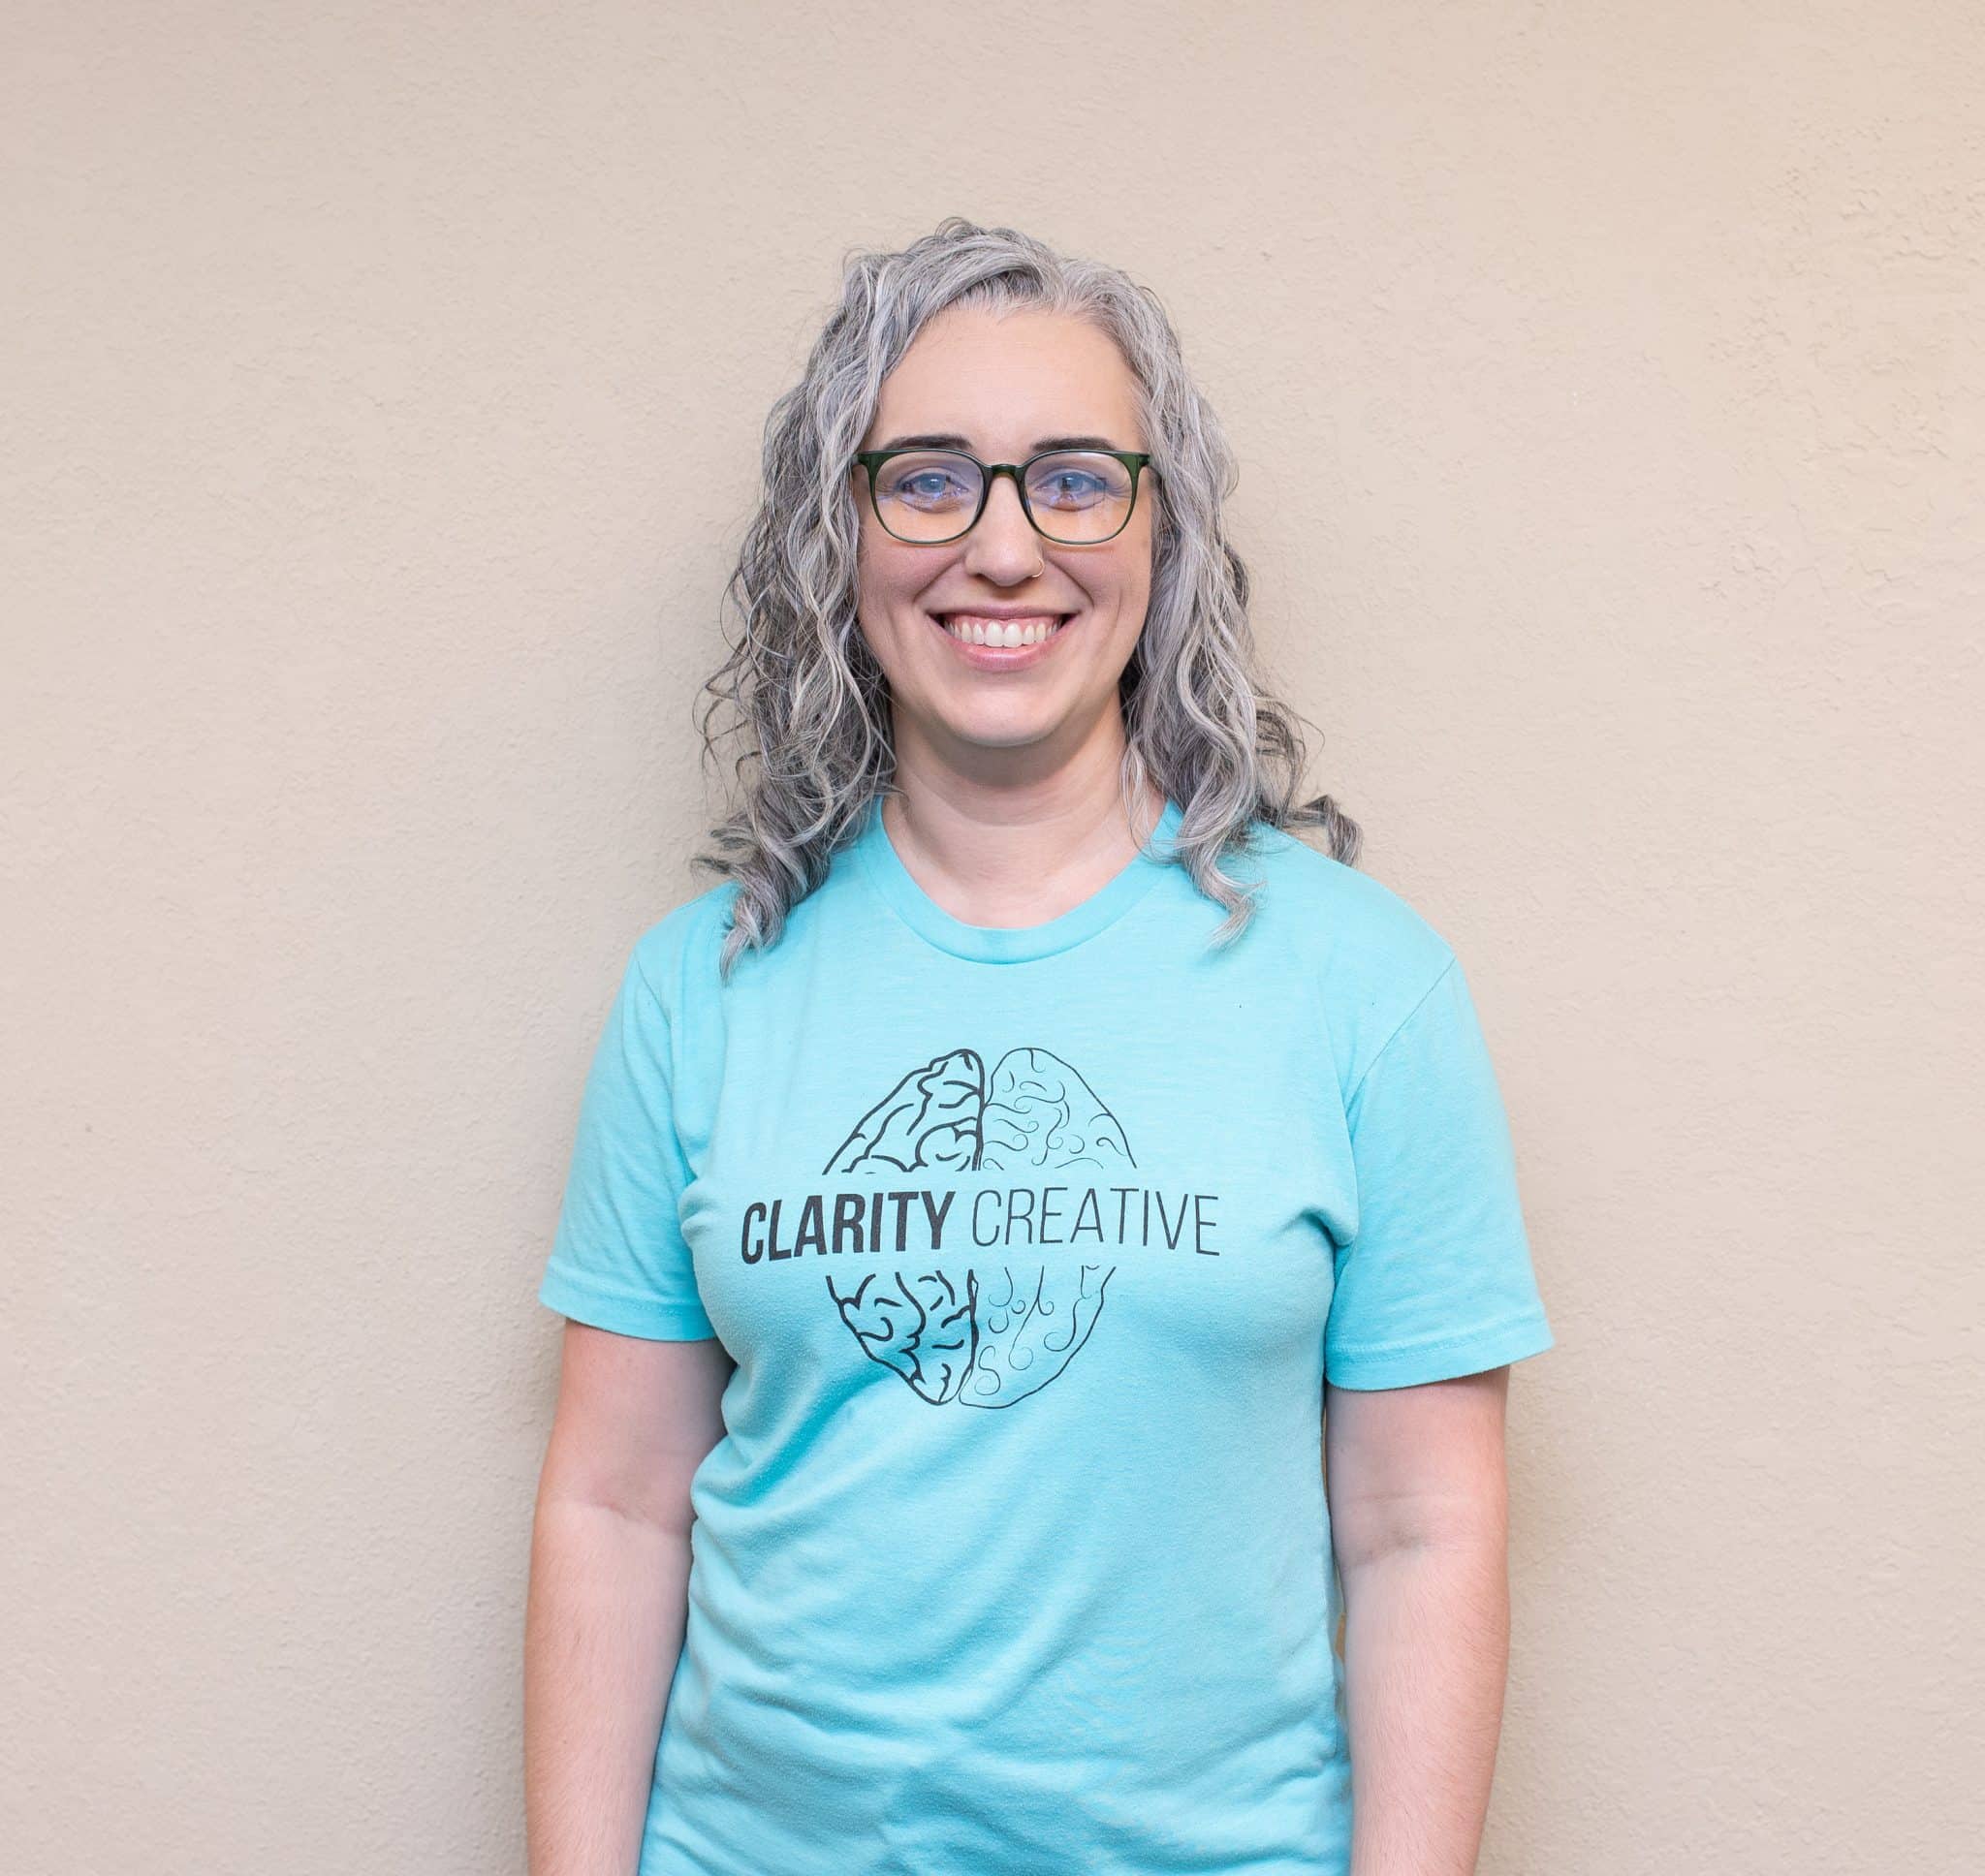 Julie of Clarity Creative Group. She is smiling, wearing glasses, and has curly salt and pepper hair. She is also wearing a teal colored Clarity Creative shirt